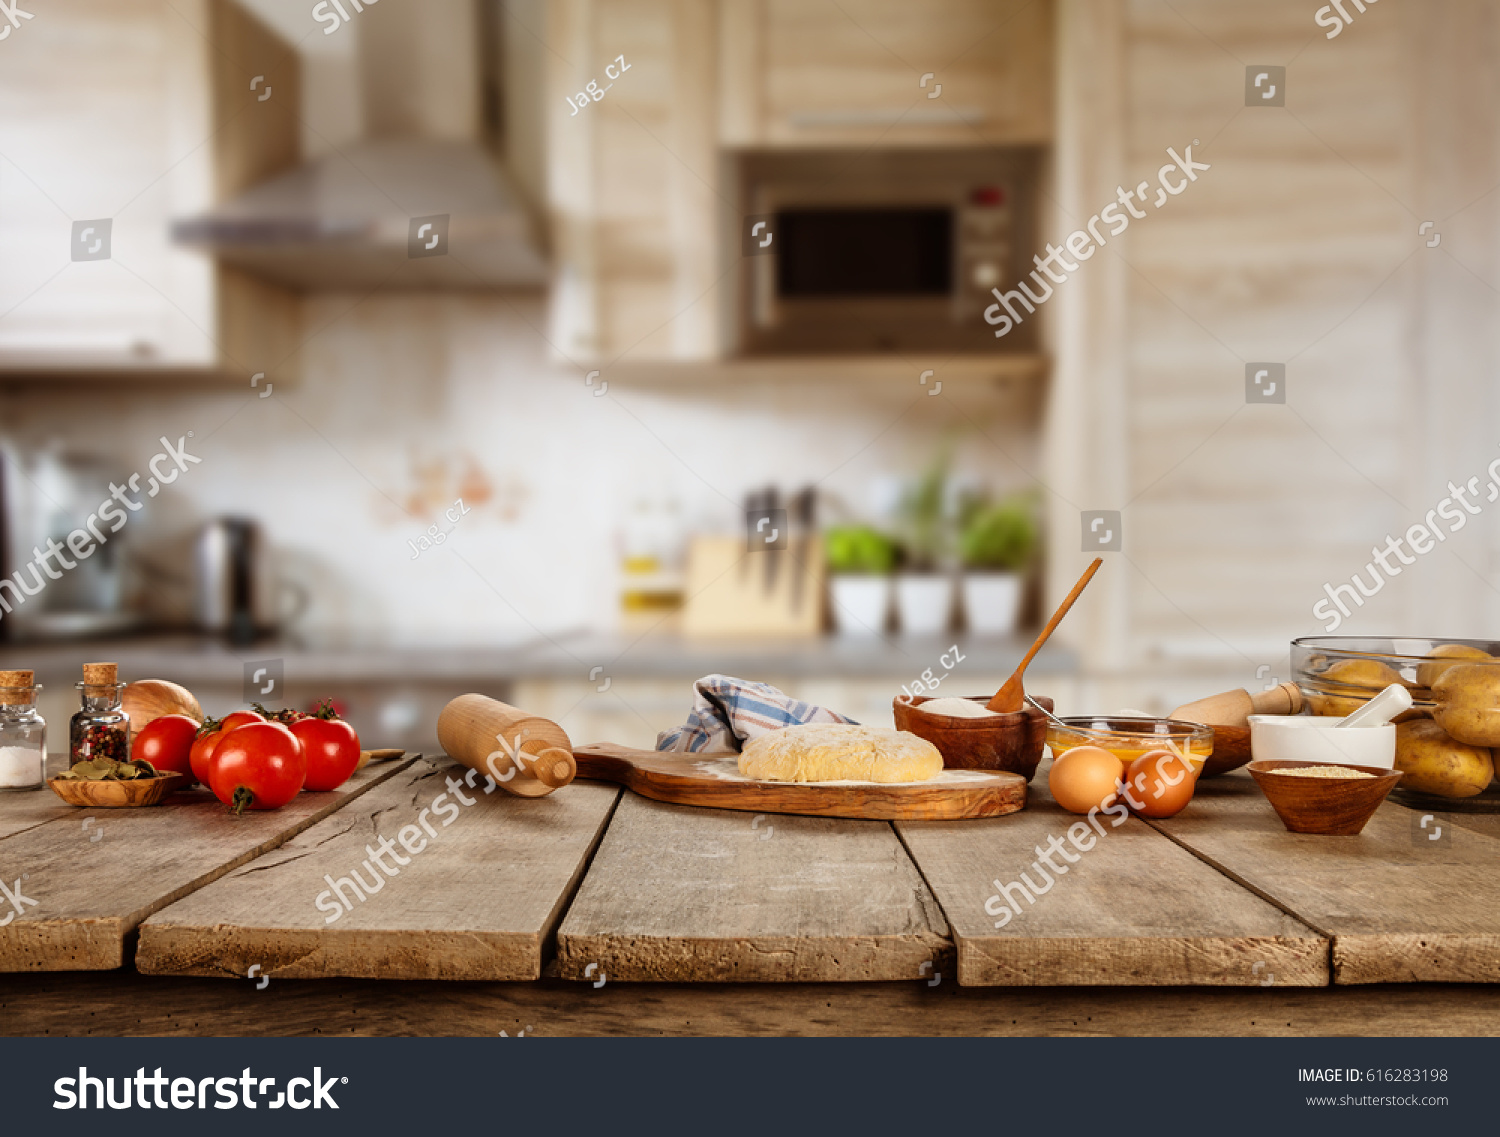 Baking ingredients placed on wooden table, ready for cooking. Copyspace for text. Concept of food preparation, kitchen on background. #616283198